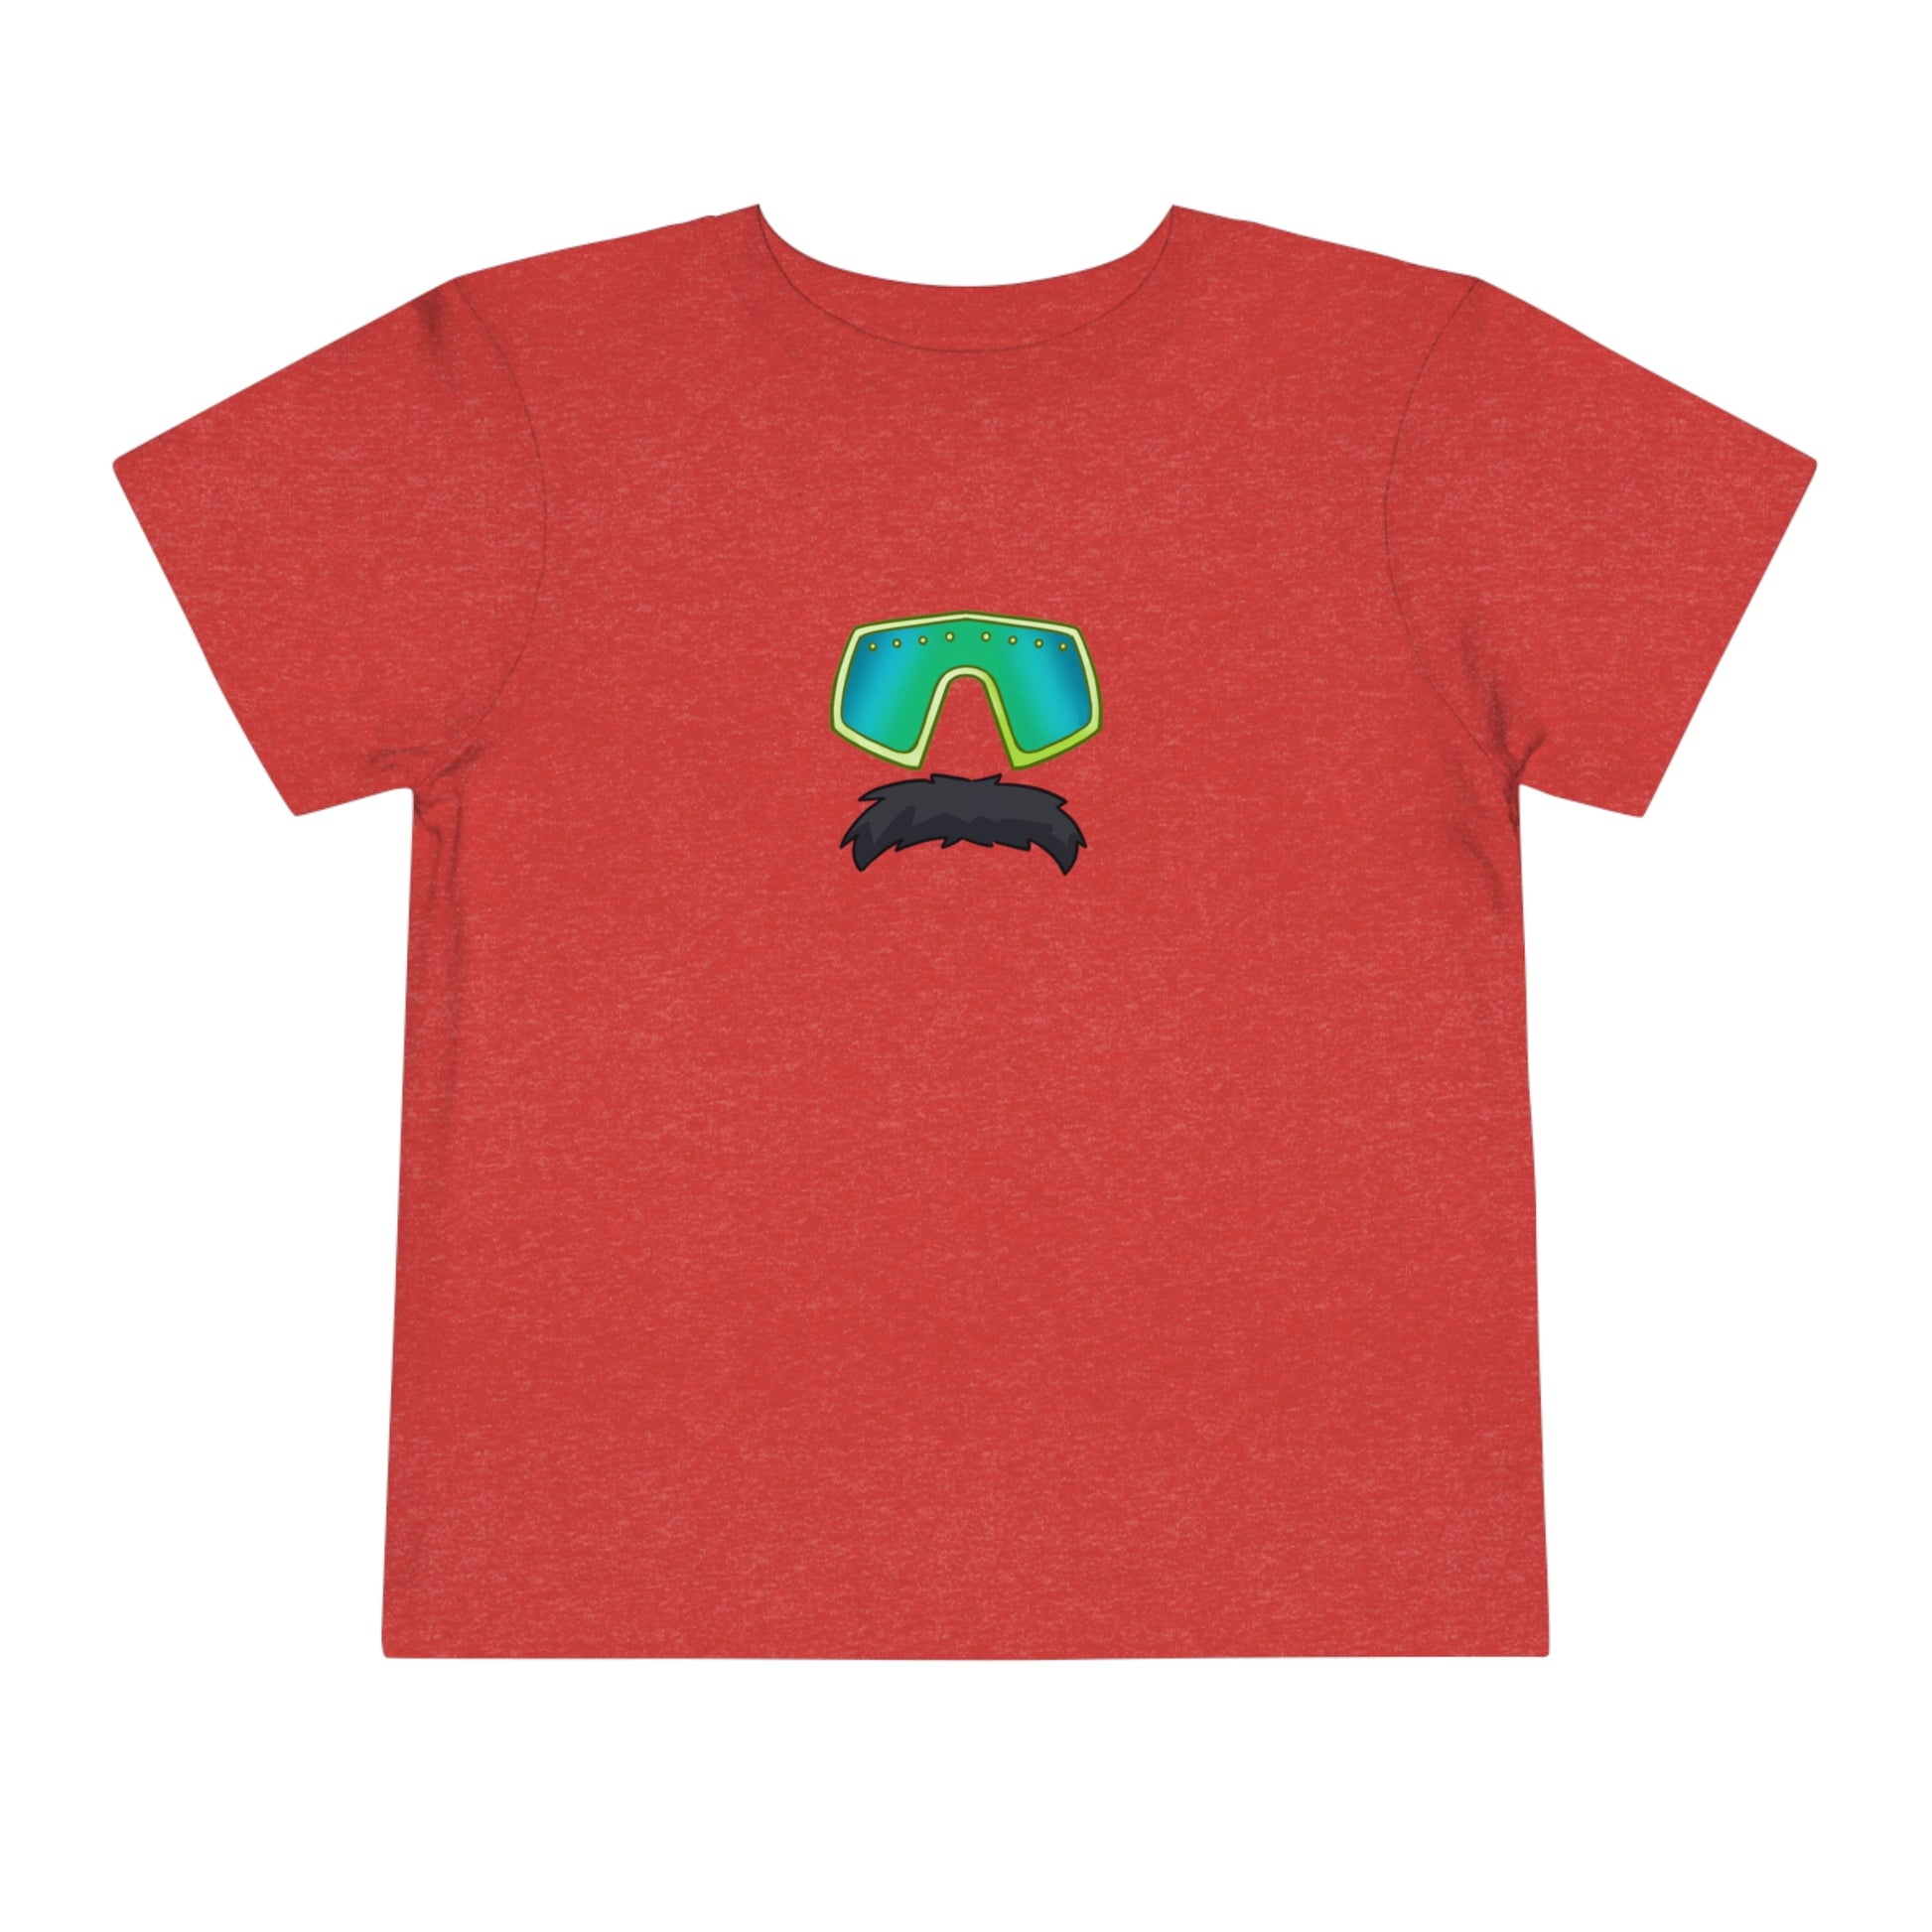 GLASSES 'STACHE EMOJI TODDLER TEE - Never Stop Chasing